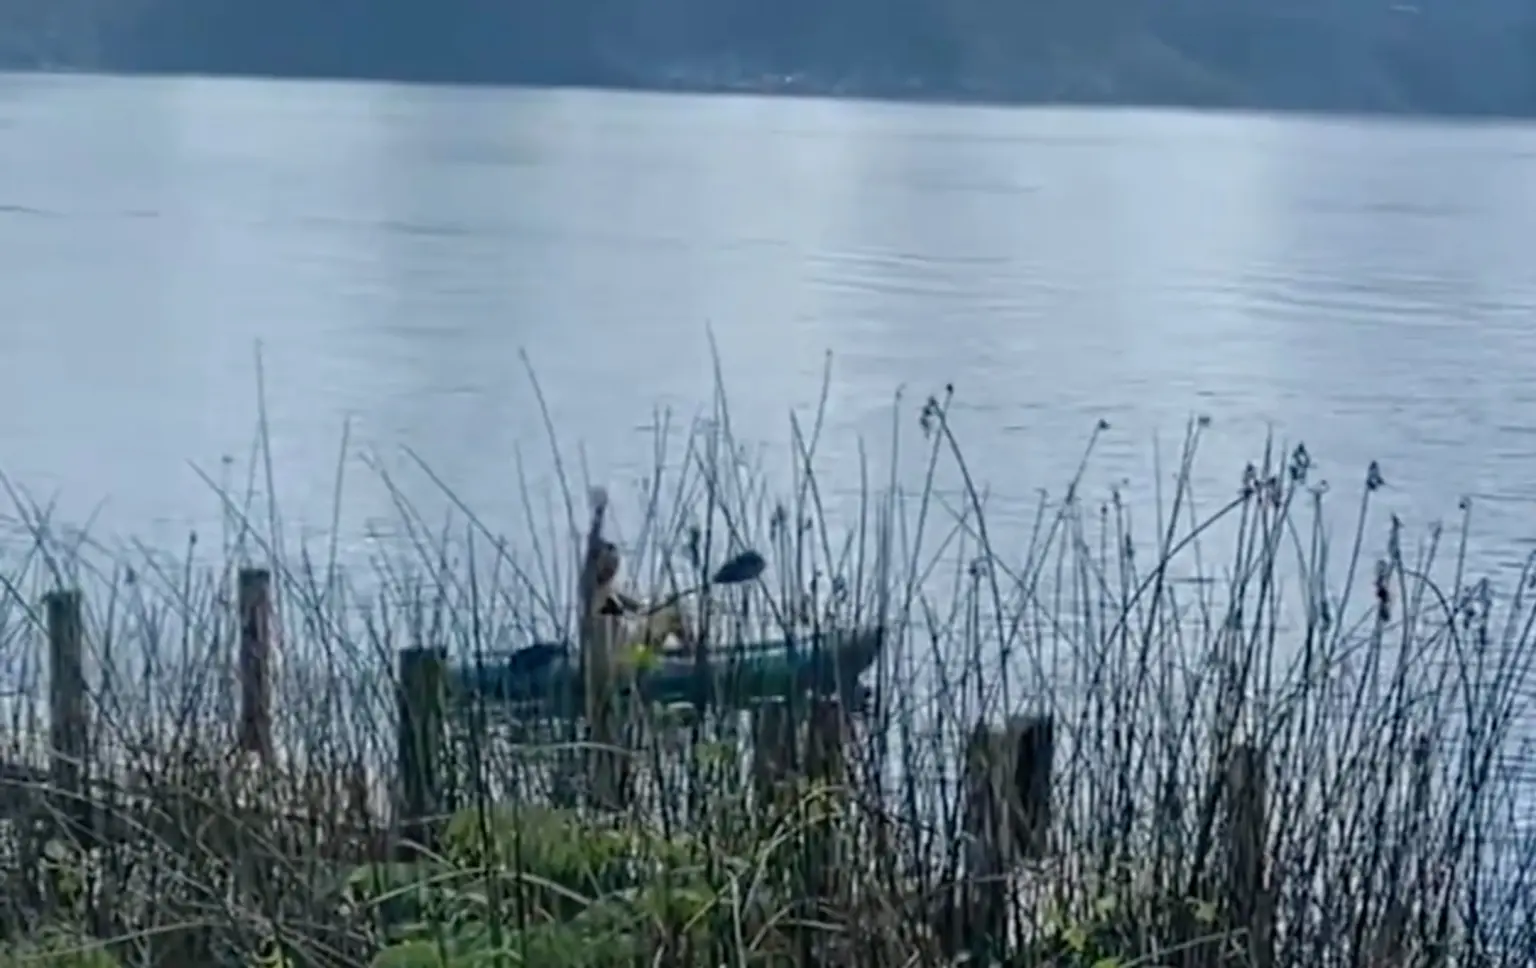 The last known video of Nancy Ng shows her waving at the camera while on her kayak